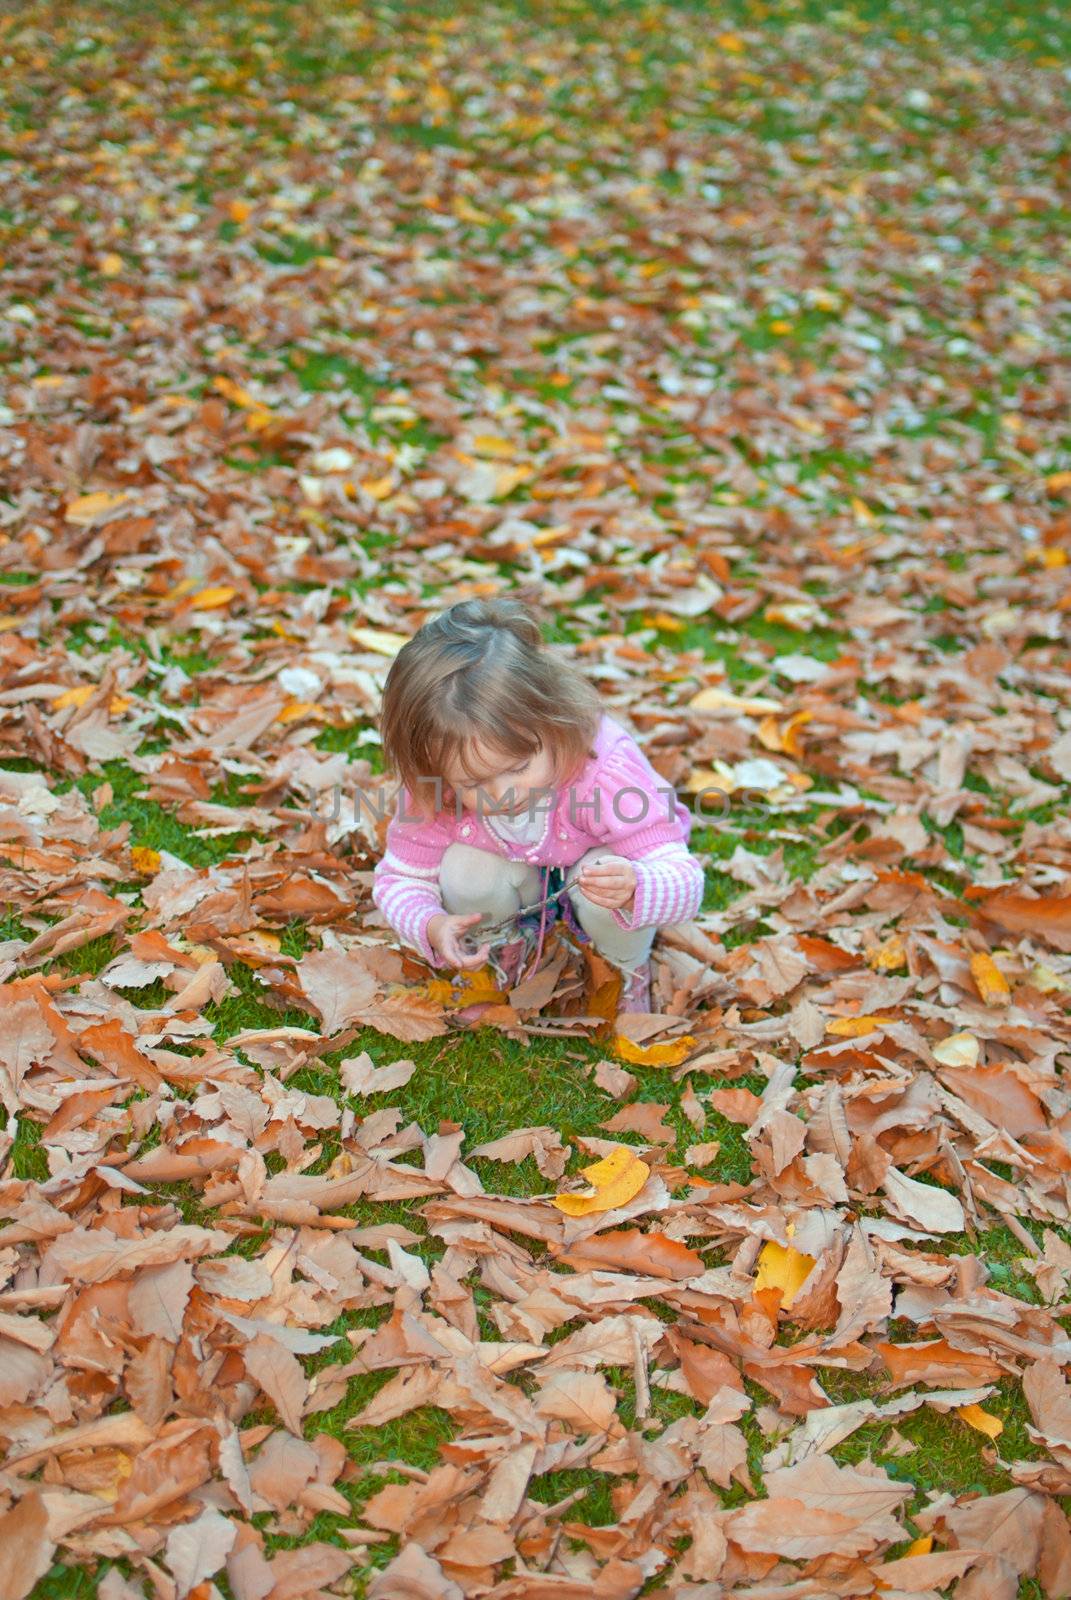 Girl (3 years old) is playing with yellow leaves on the ground. Vertical version